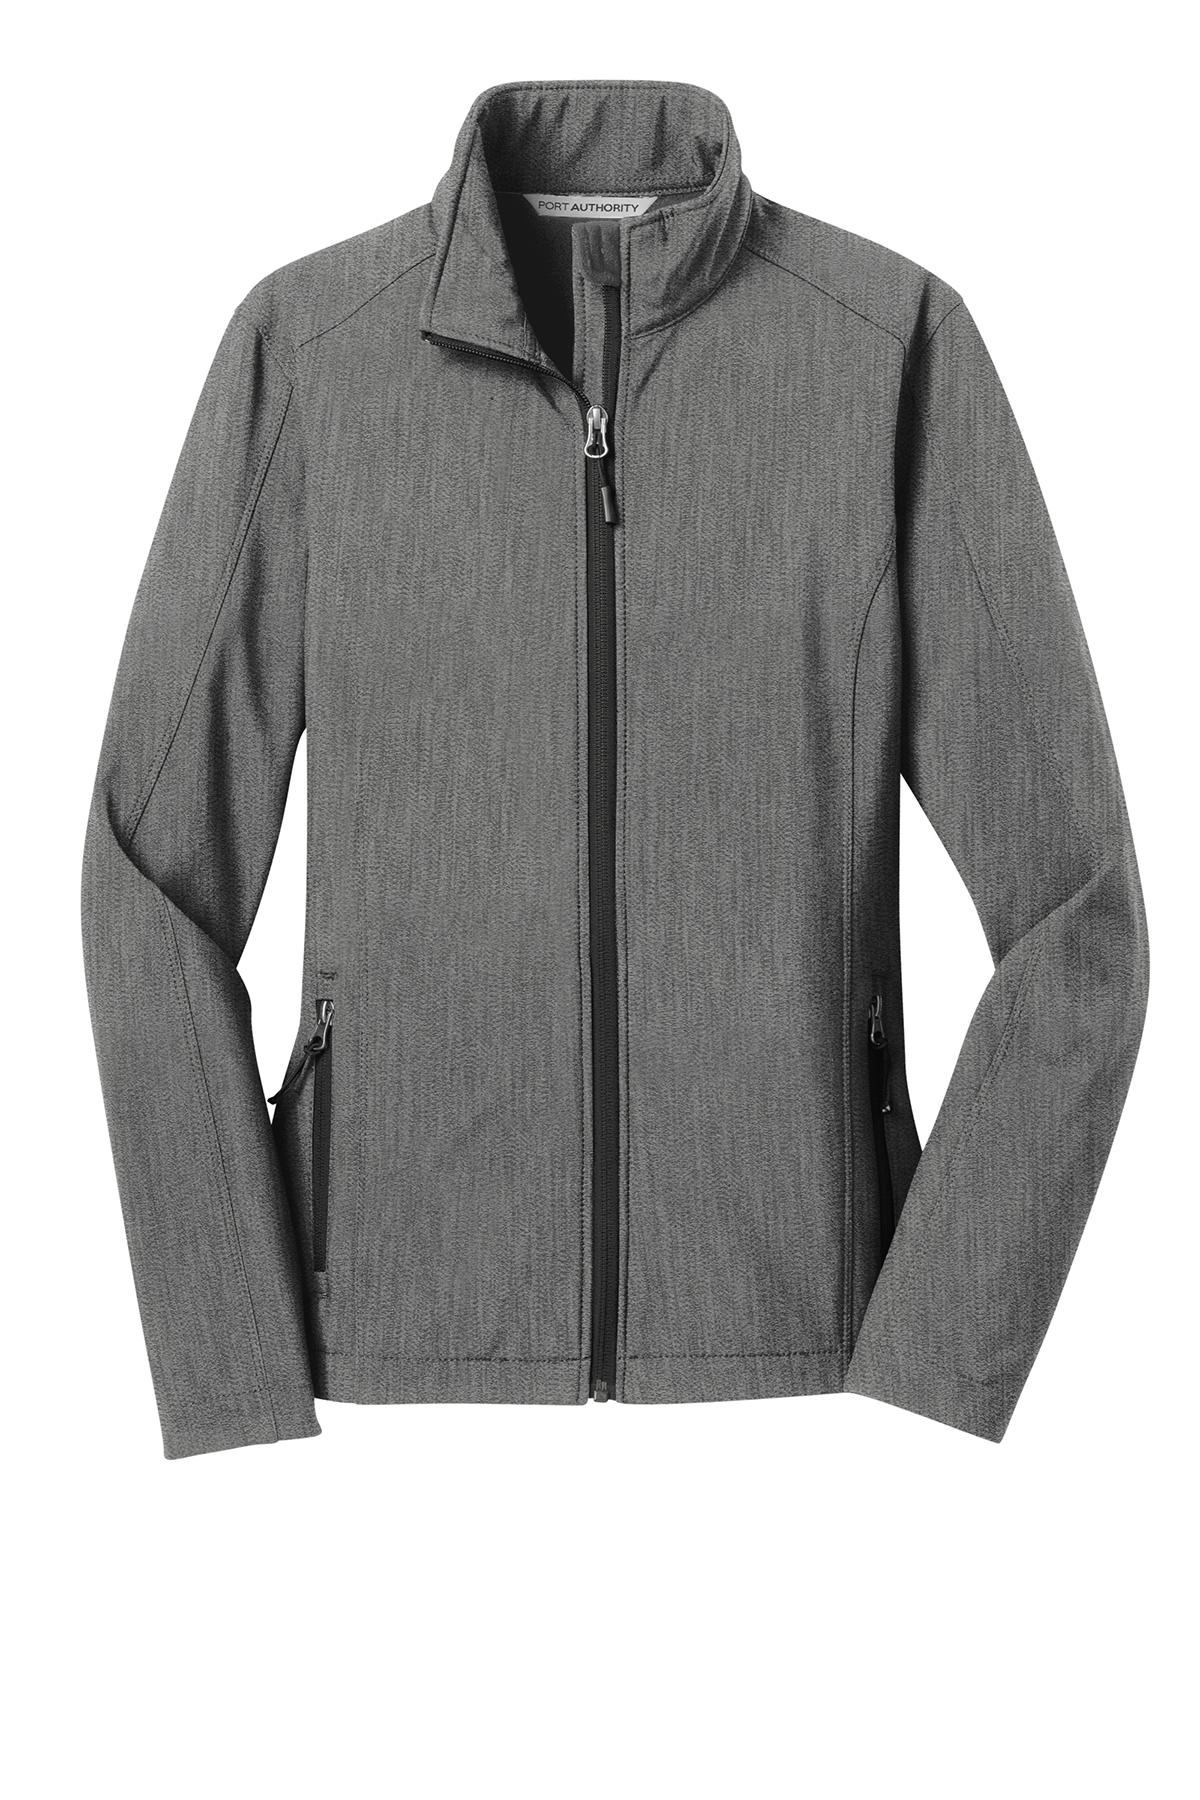 Port Authority Ladies Core Soft Shell Jacket | Product | Company Casuals